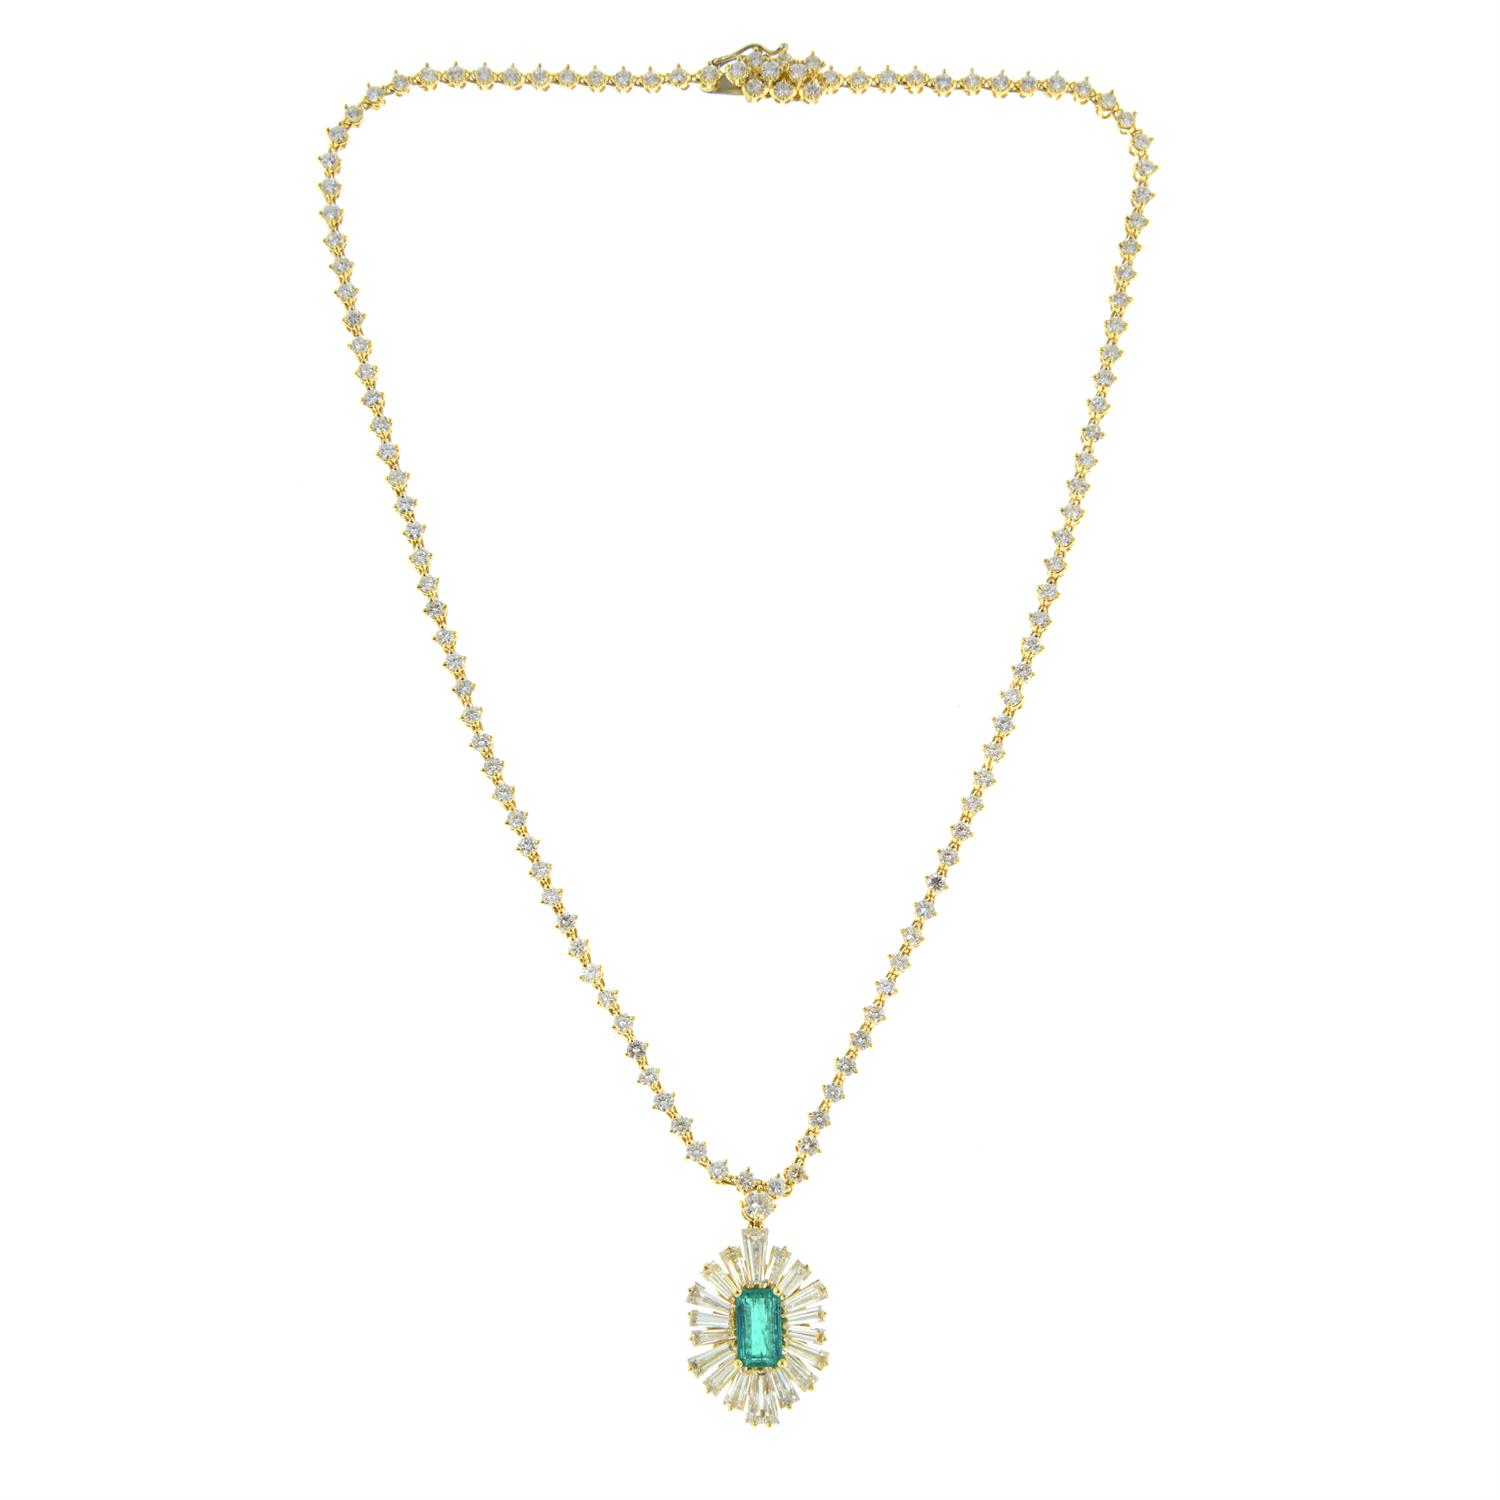 An emerald and tapered baguette-cut diamond pendant, on brilliant-cut diamond chain. - Image 4 of 5